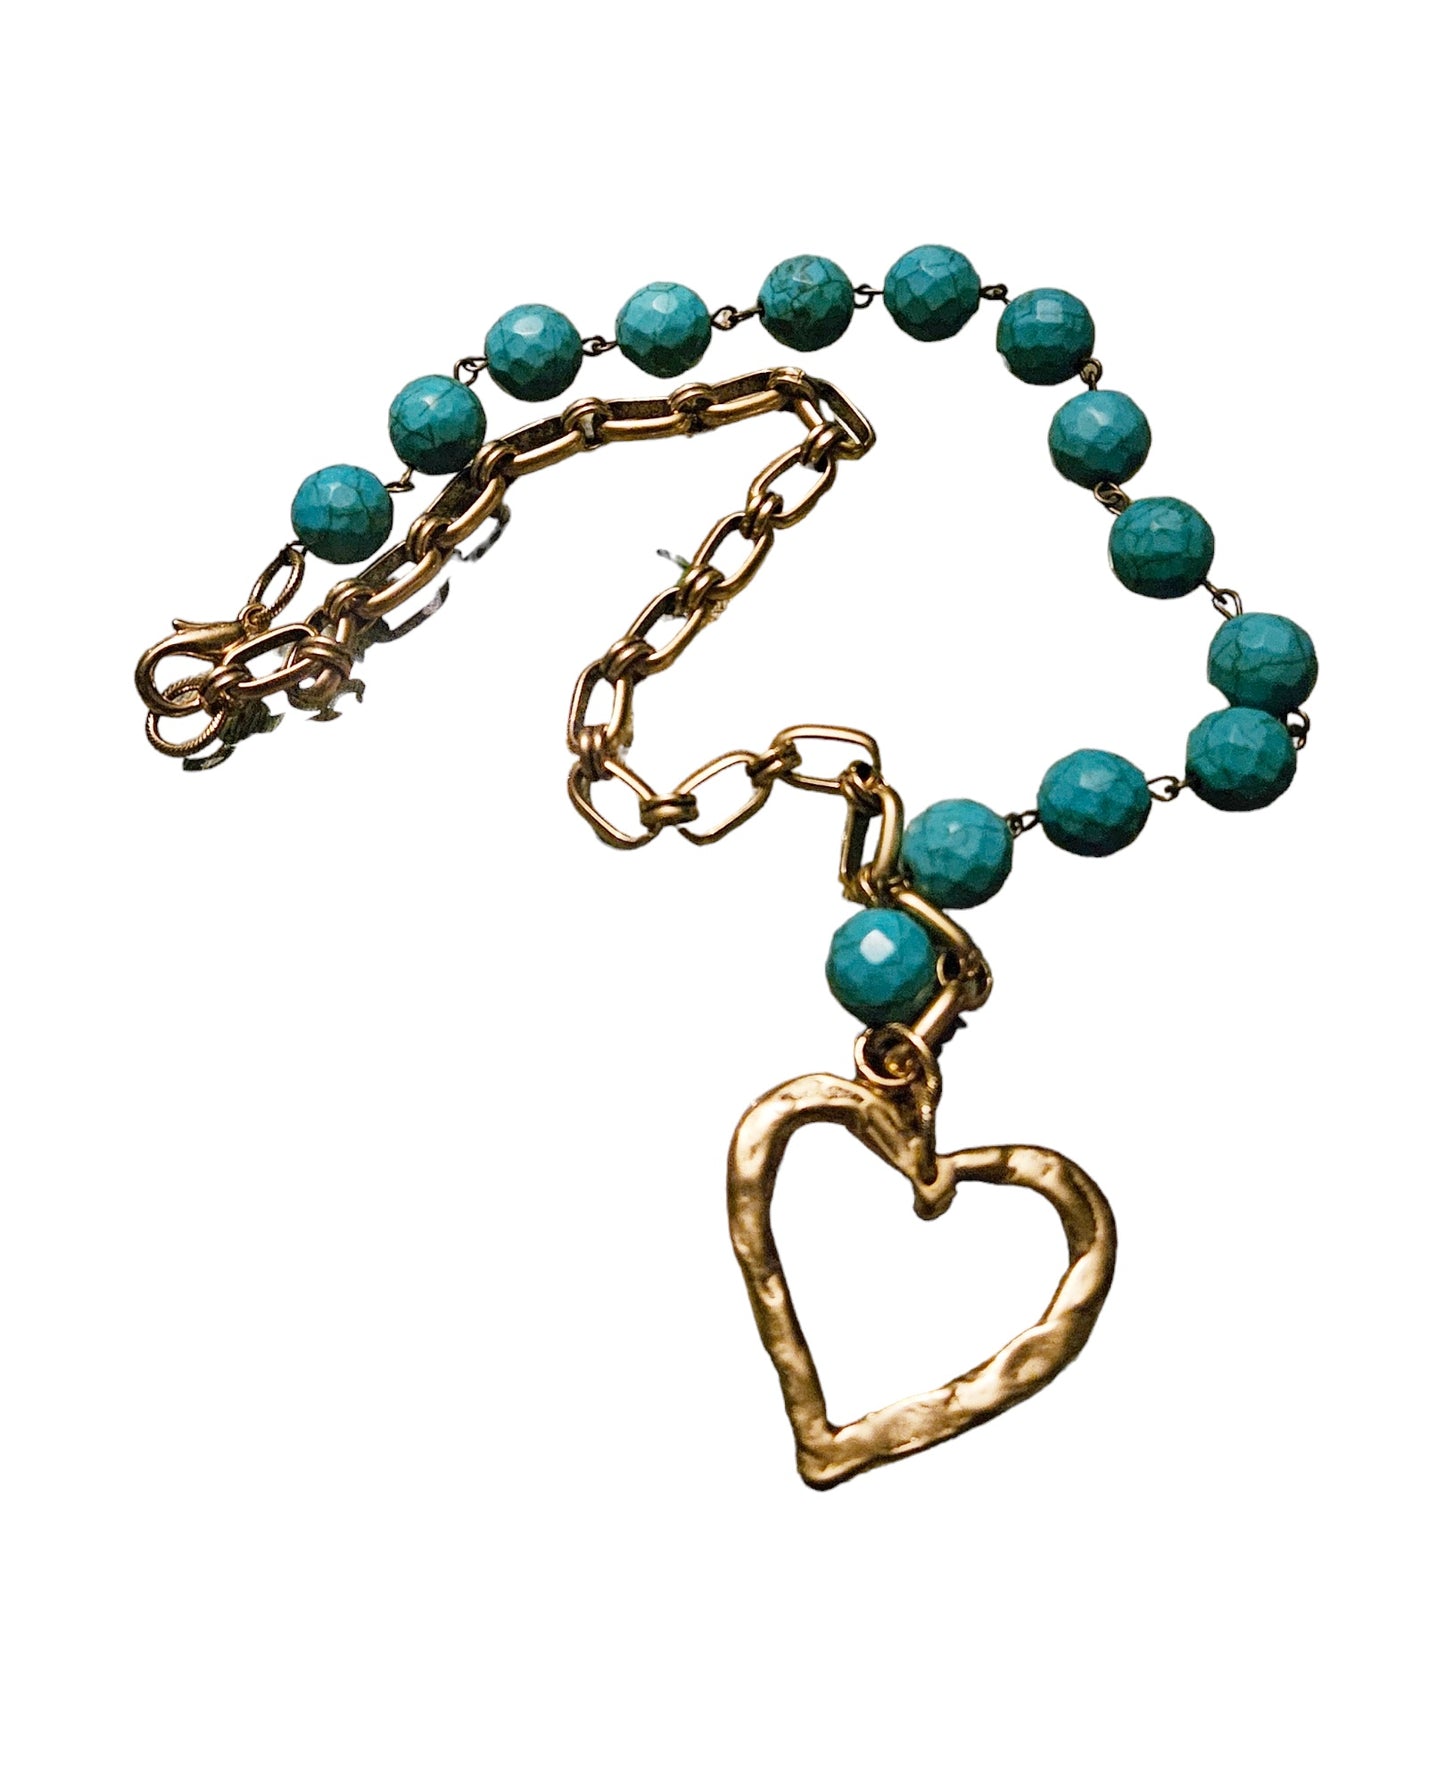 Turquoise heart necklace asymmetrical  length 18"